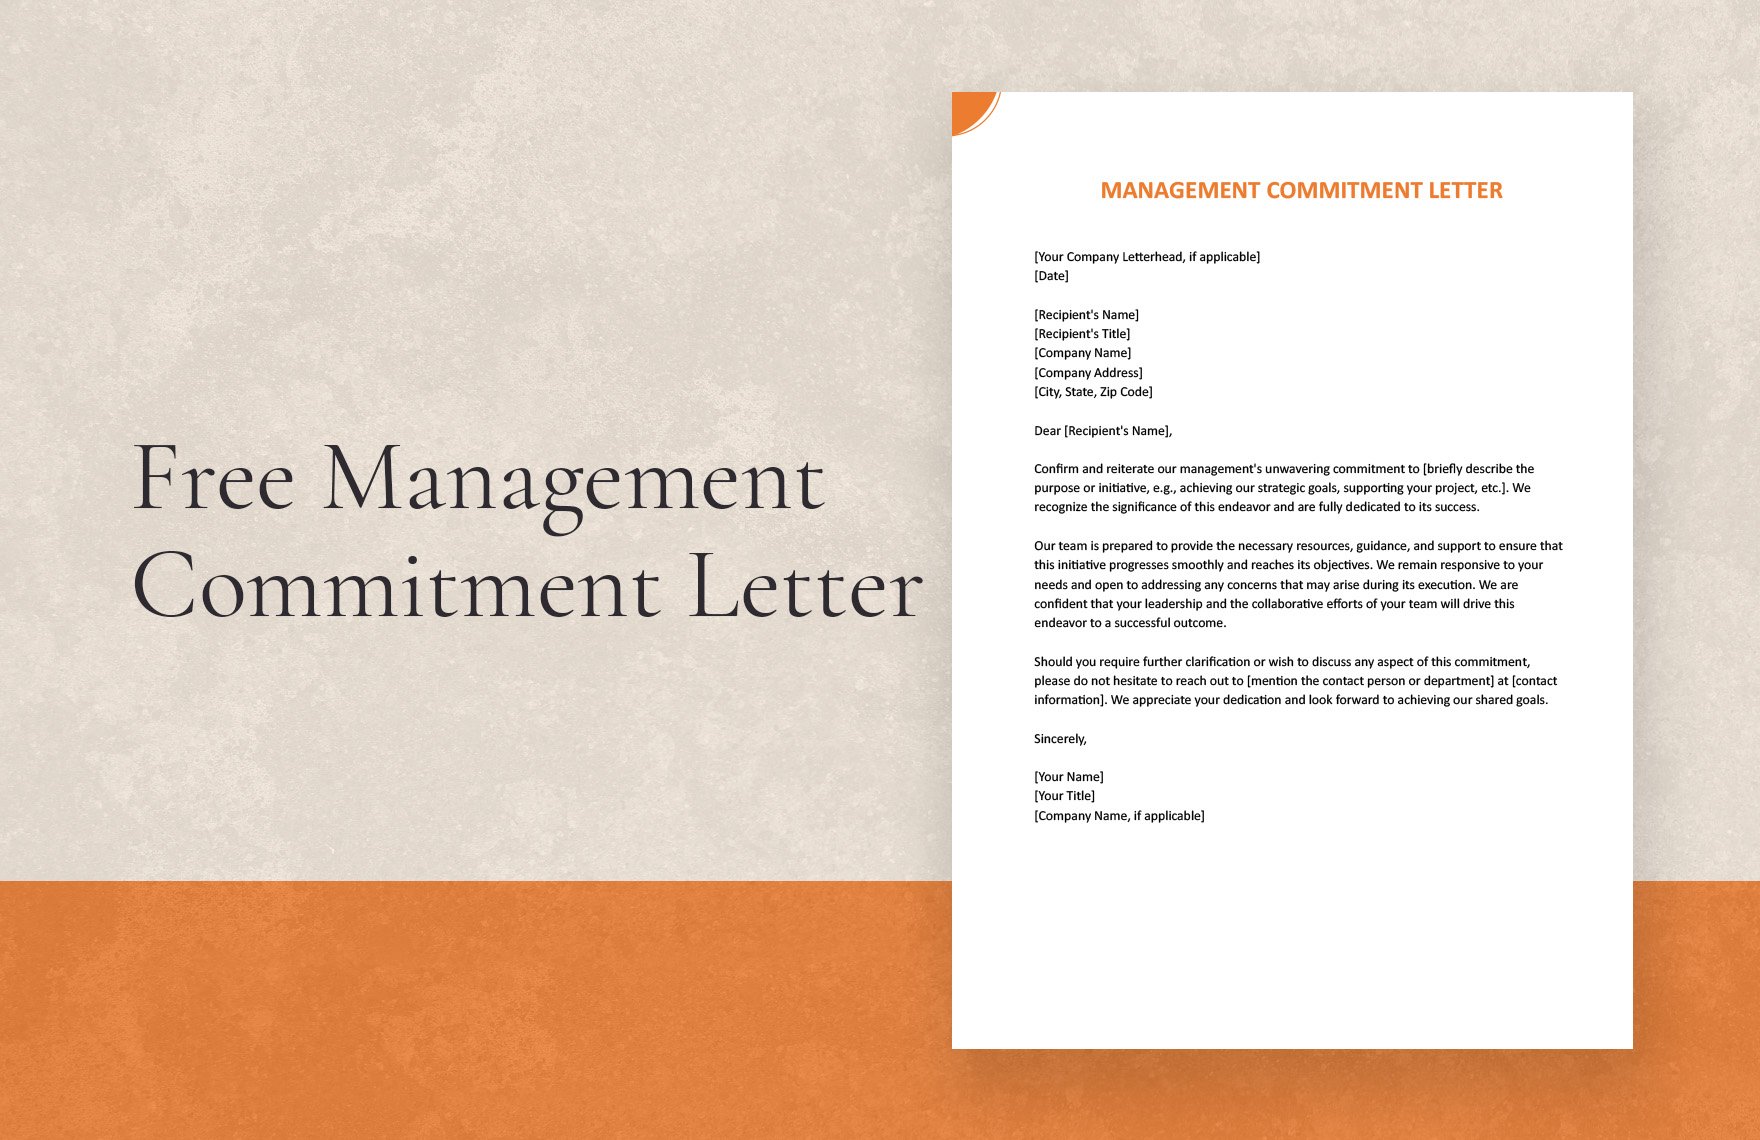 Management Commitment Letter in Word, Google Docs